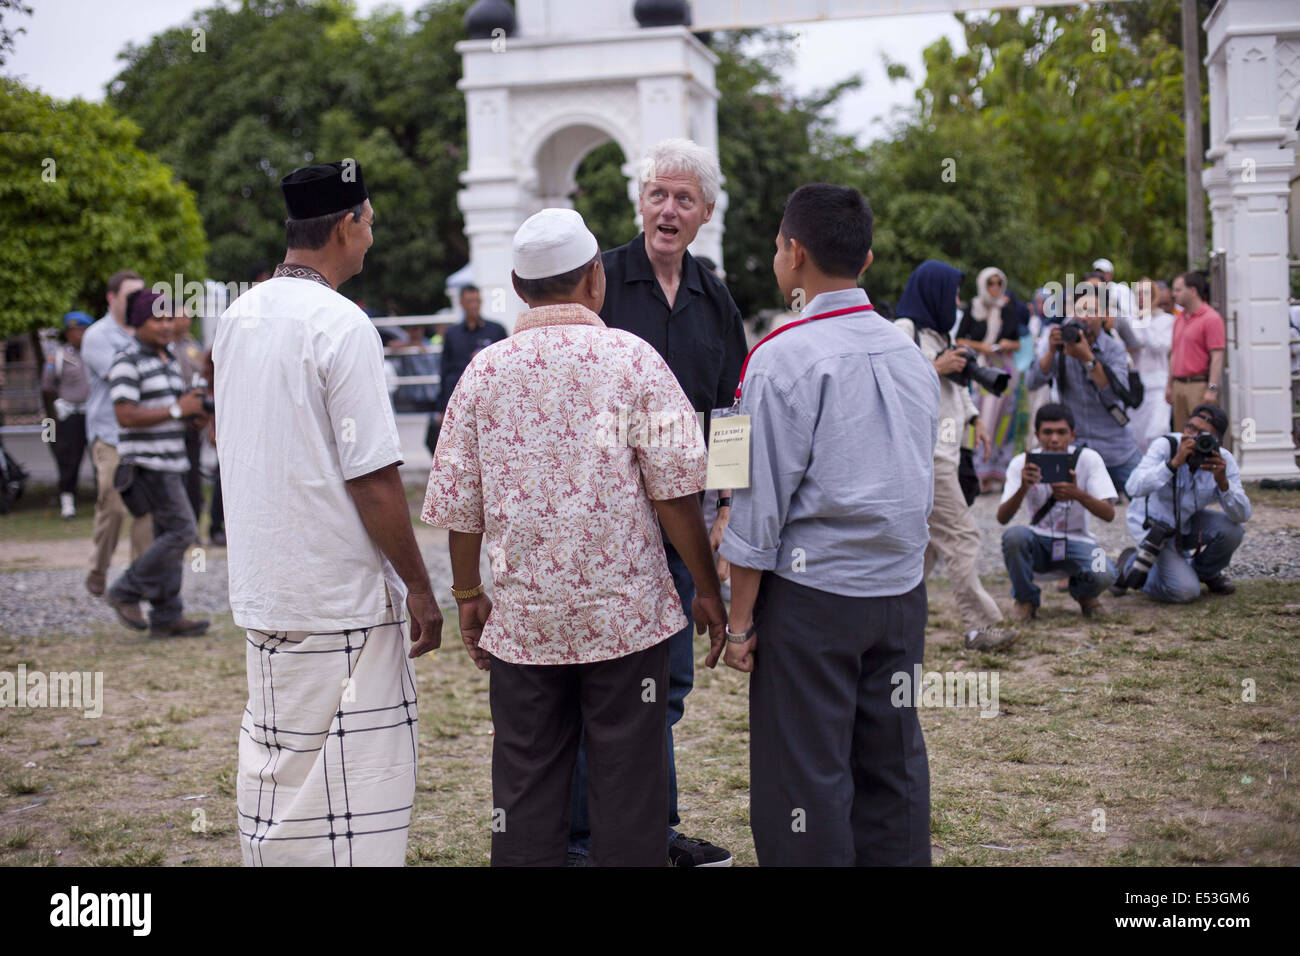 Aceh Besar, Aceh, Indonesia. 19th July, 2014. BILL CLINTON, former US President, talks with Lampuuk villagers during his visit in Aceh to see reconstruction progress after Tsunami on December 26th 2004.Aceh, a province in Indonesia, is the worst hit area during 2004 Tsunami. Around 221,000 people killed or missing. Credit:  Fauzan Ijazah/ZUMA Wire/Alamy Live News Stock Photo